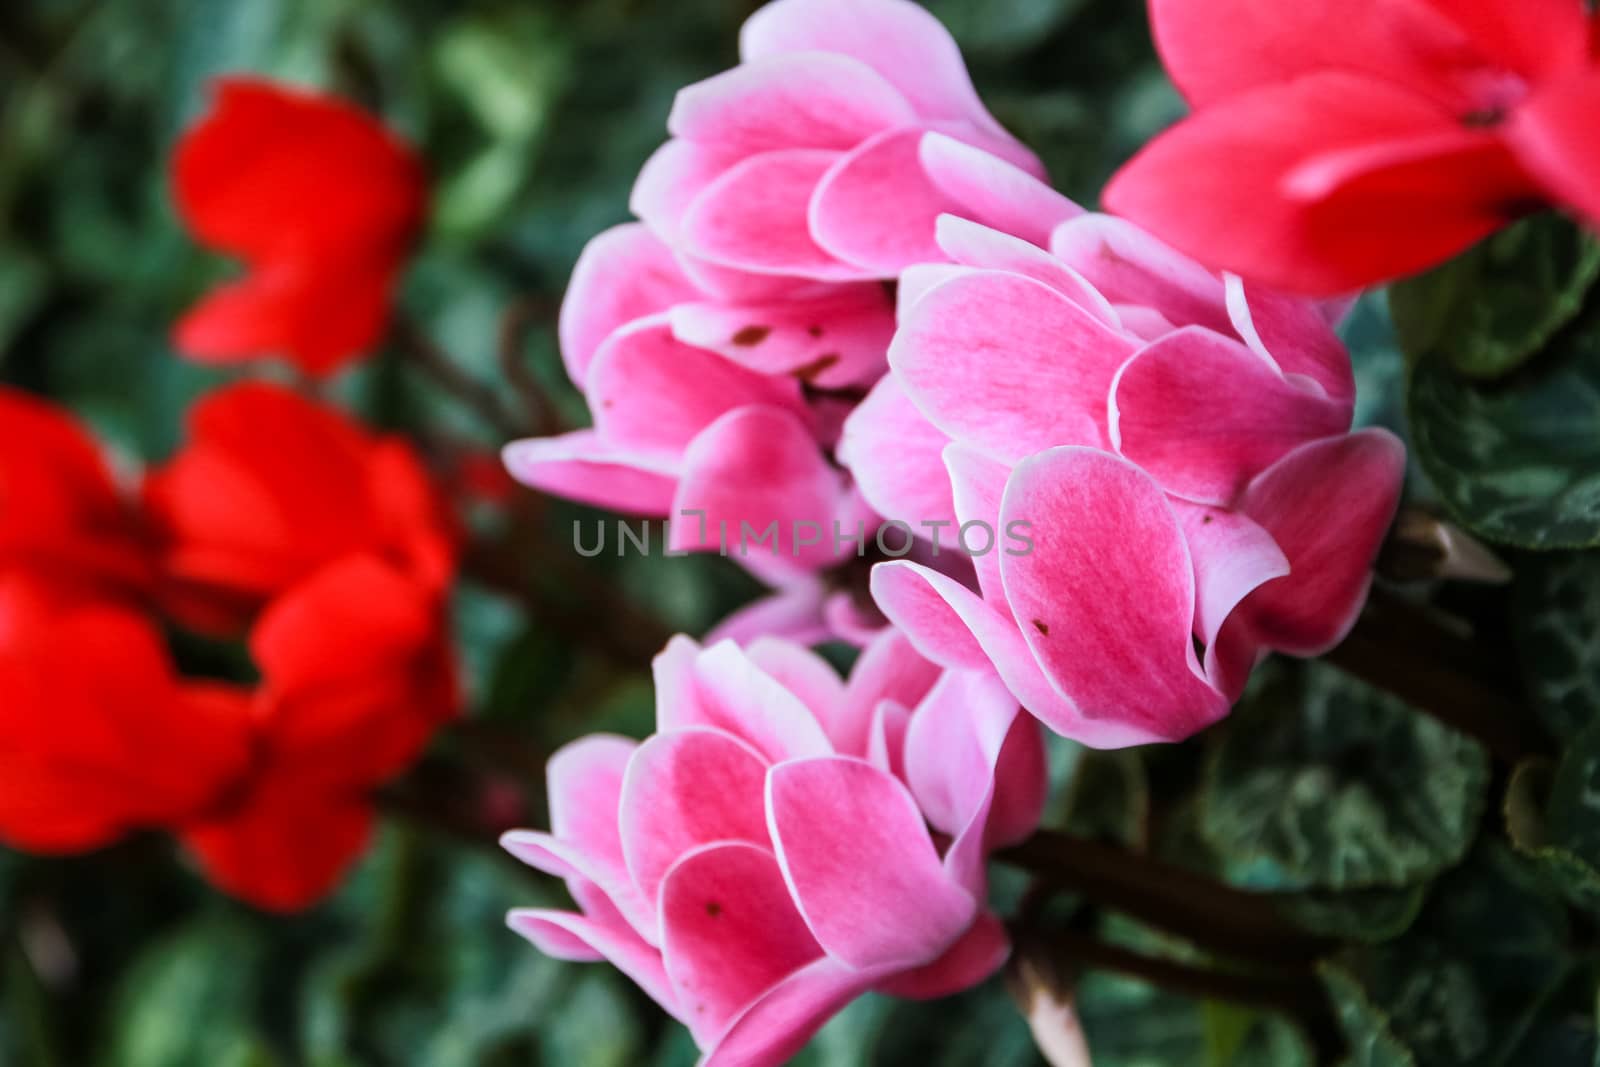 Beautiful pink and red cyclamen flowers with peculiar pattern on leaves, planted in a flower pot in a garden.